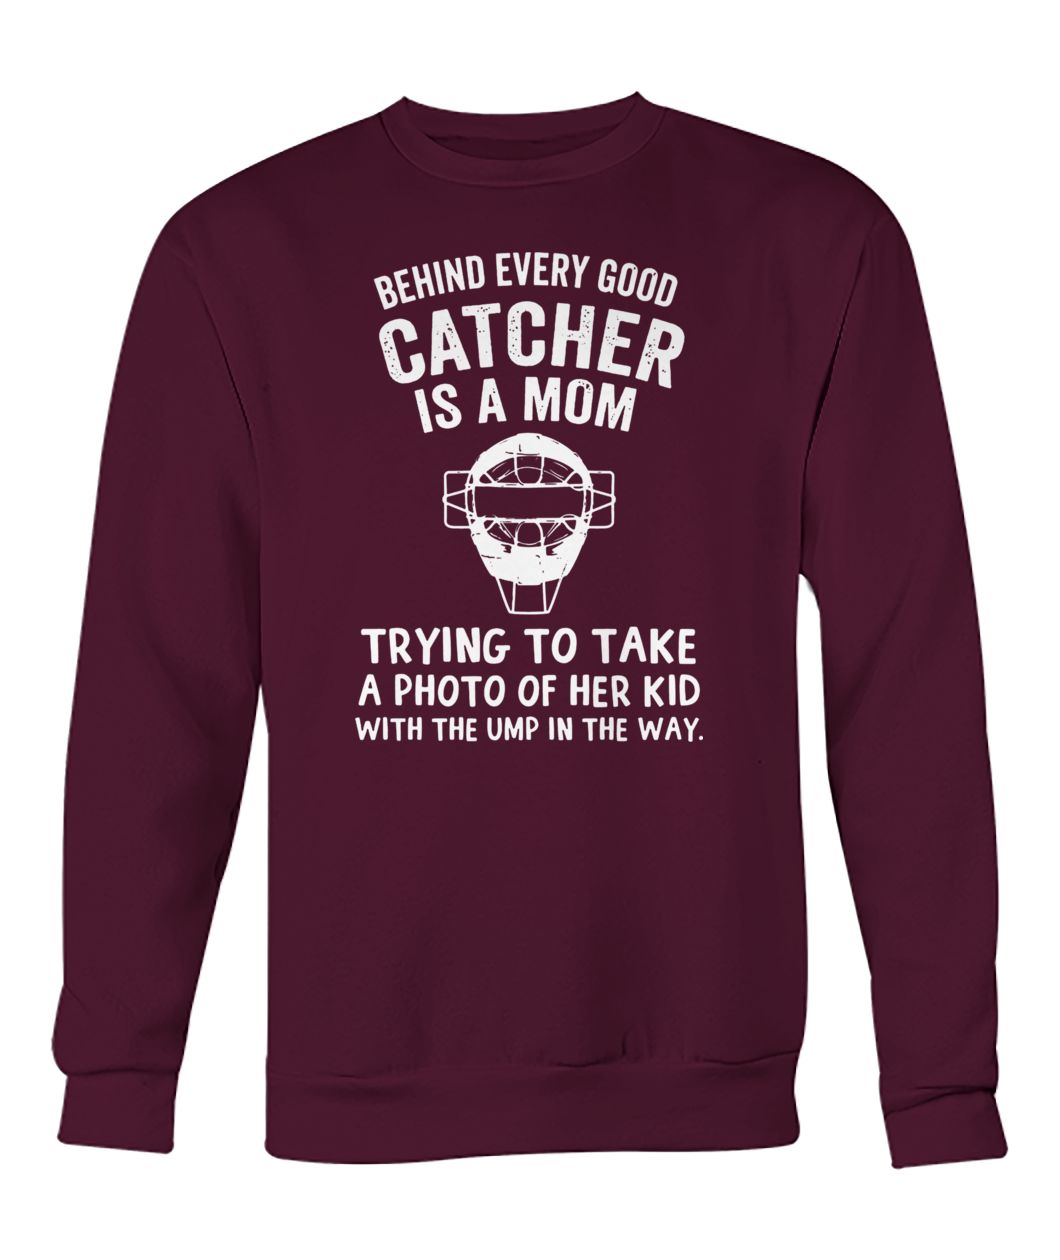 Behind every good catcher is a mom trying to take a photo of her kid with the ump in the way crew neck sweatshirt